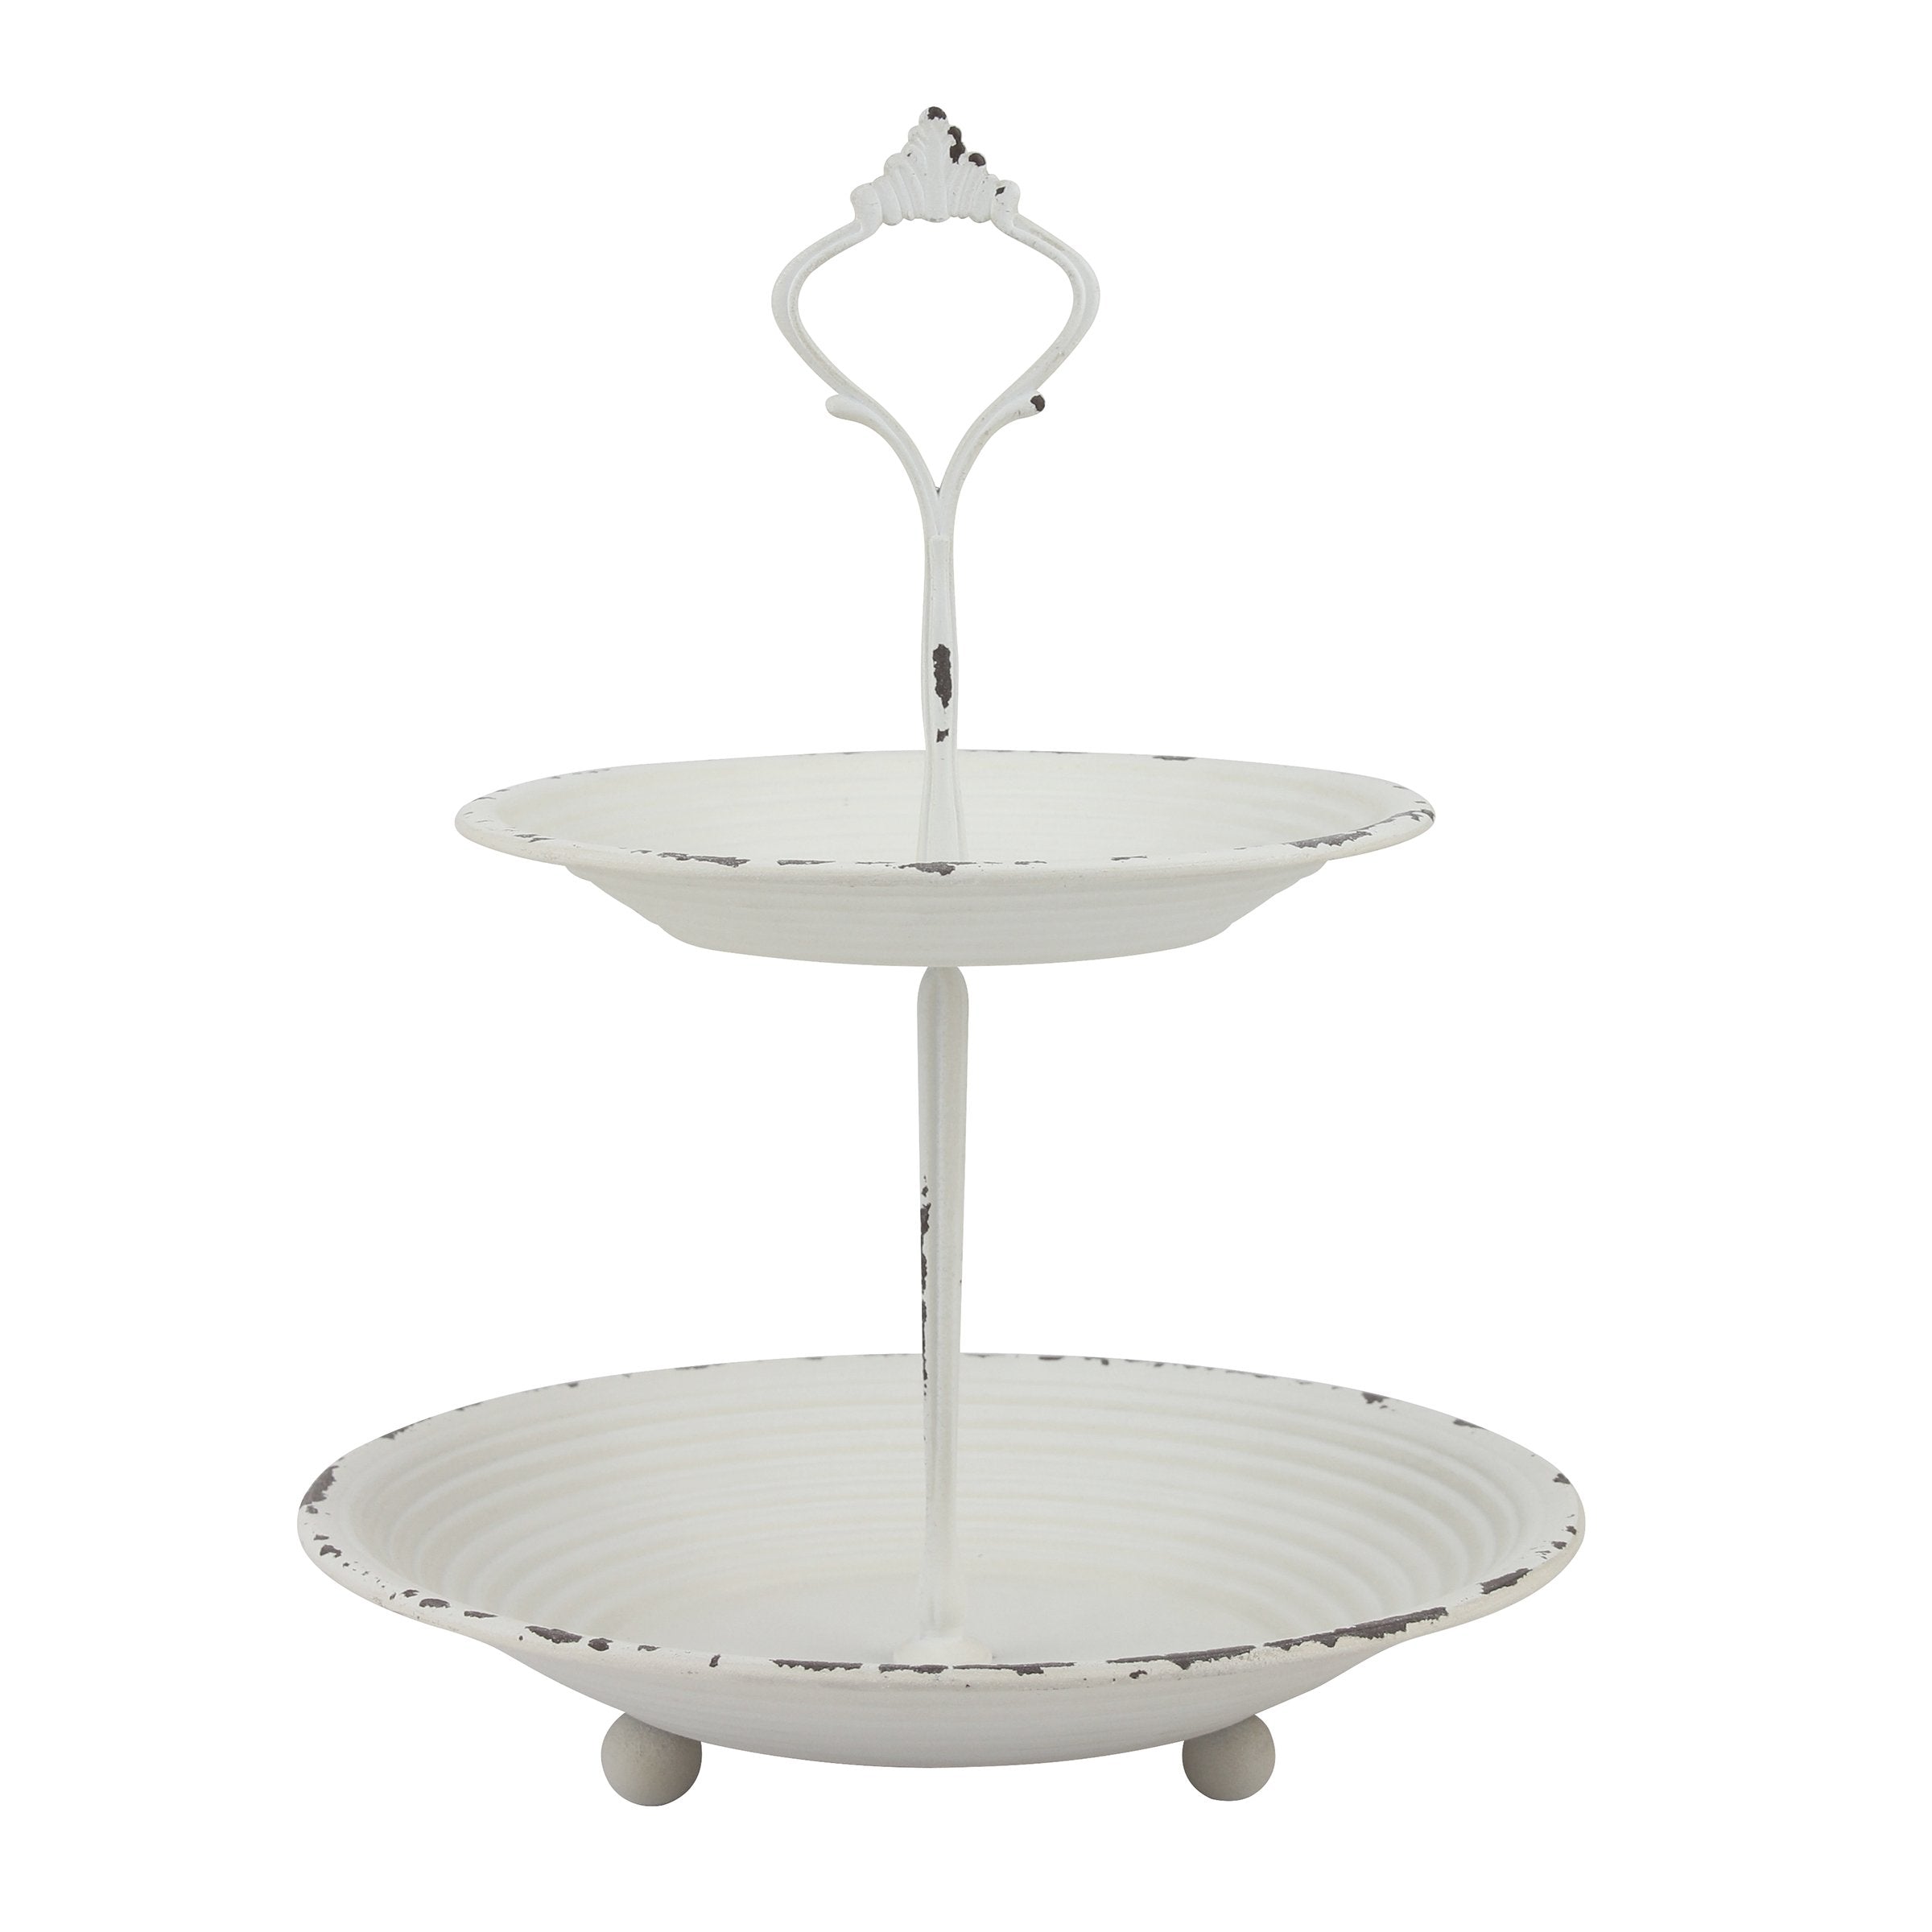 2-Tier Trinket Tray with Attached Handle - Metal - Off-White - 9.8" x 7.6" (WS)